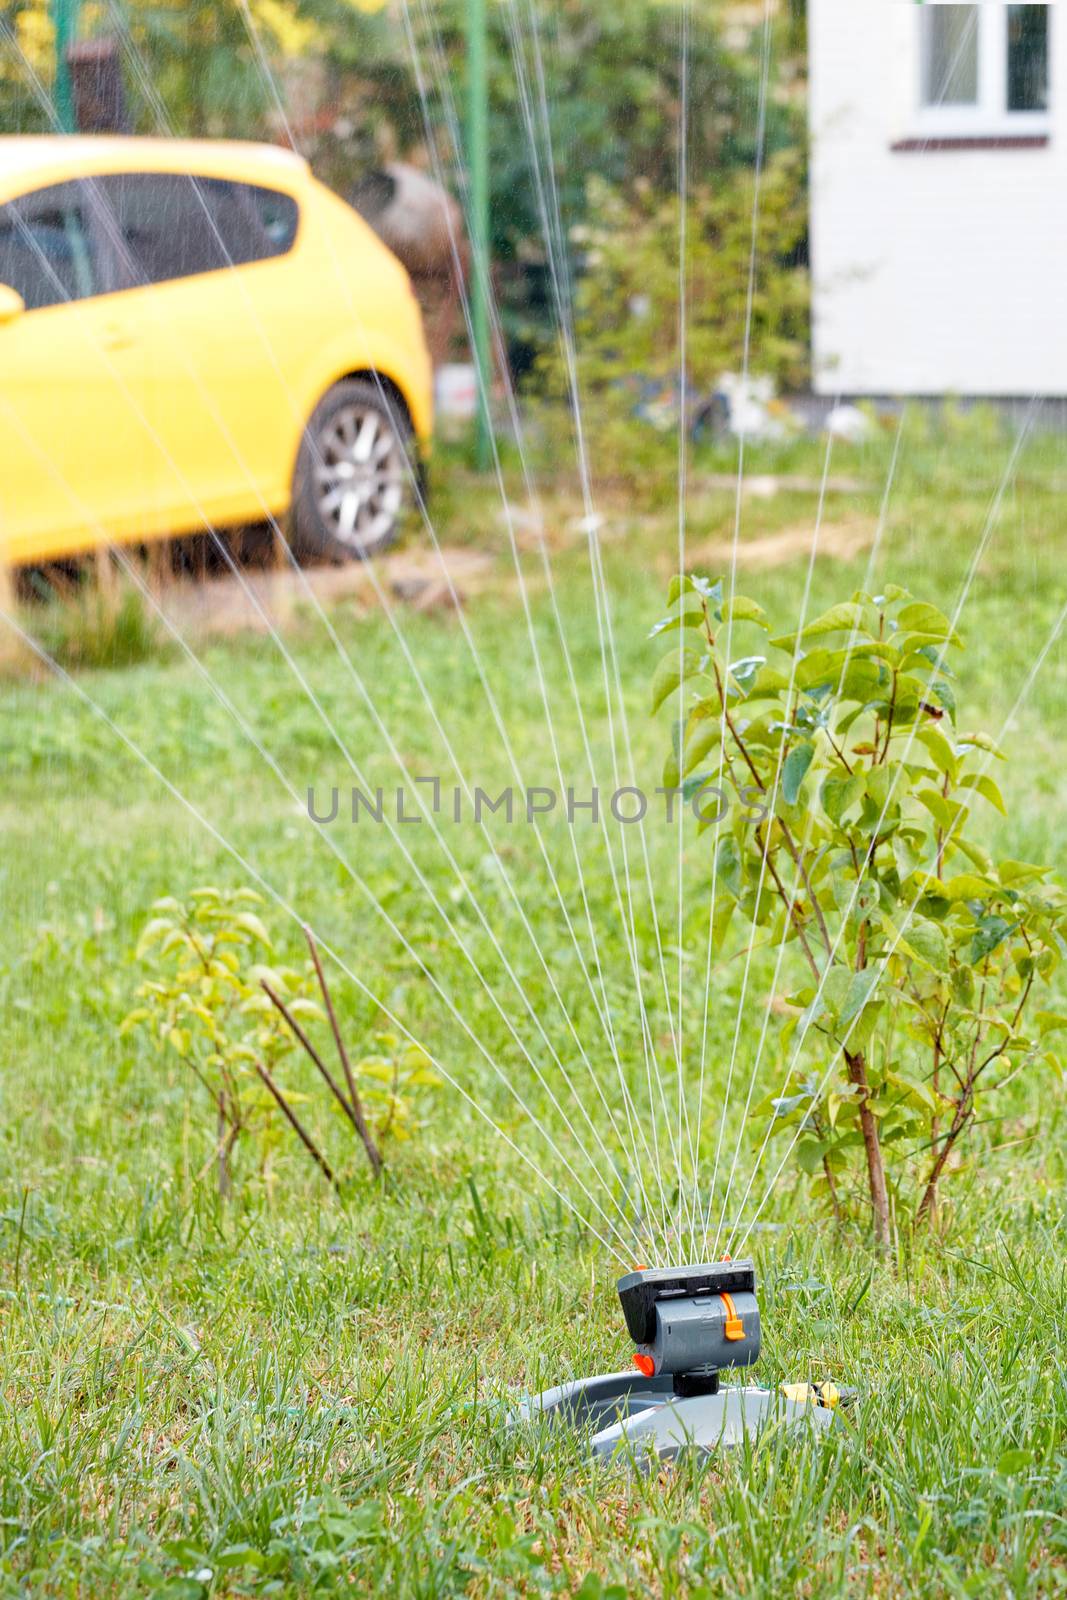 Multidirectional water jets of an automatic oscillating sprayer watered young trees and a lawn in a young garden against the backdrop of a car and part of a private house in blur.